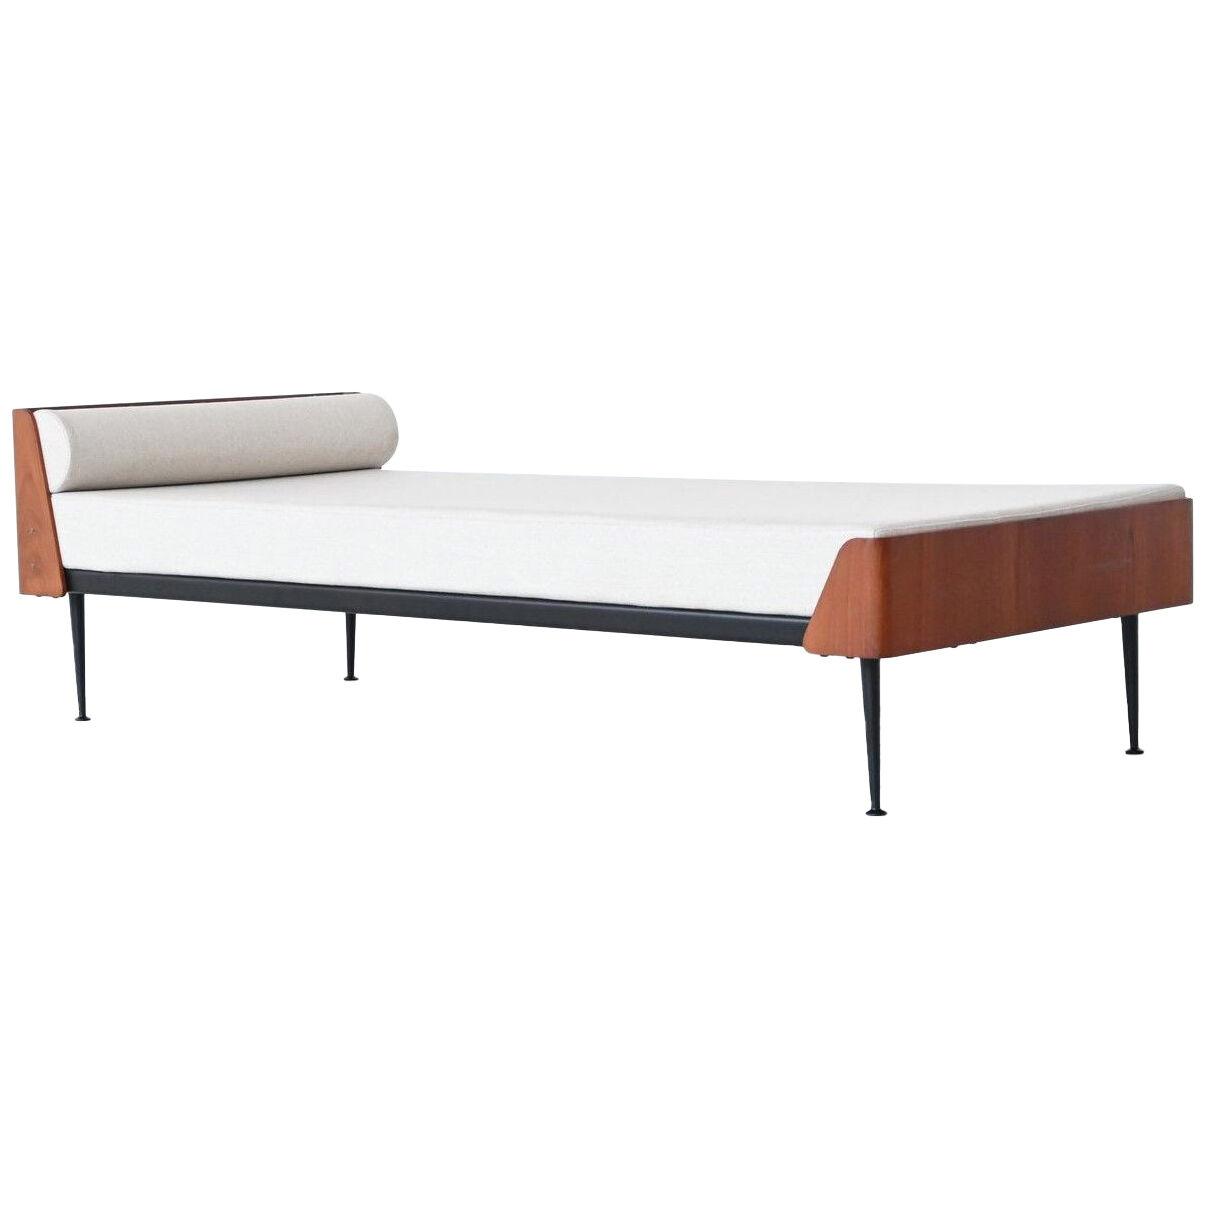 Friso Kramer Euroika Series daybed Auping The Netherlands 1963